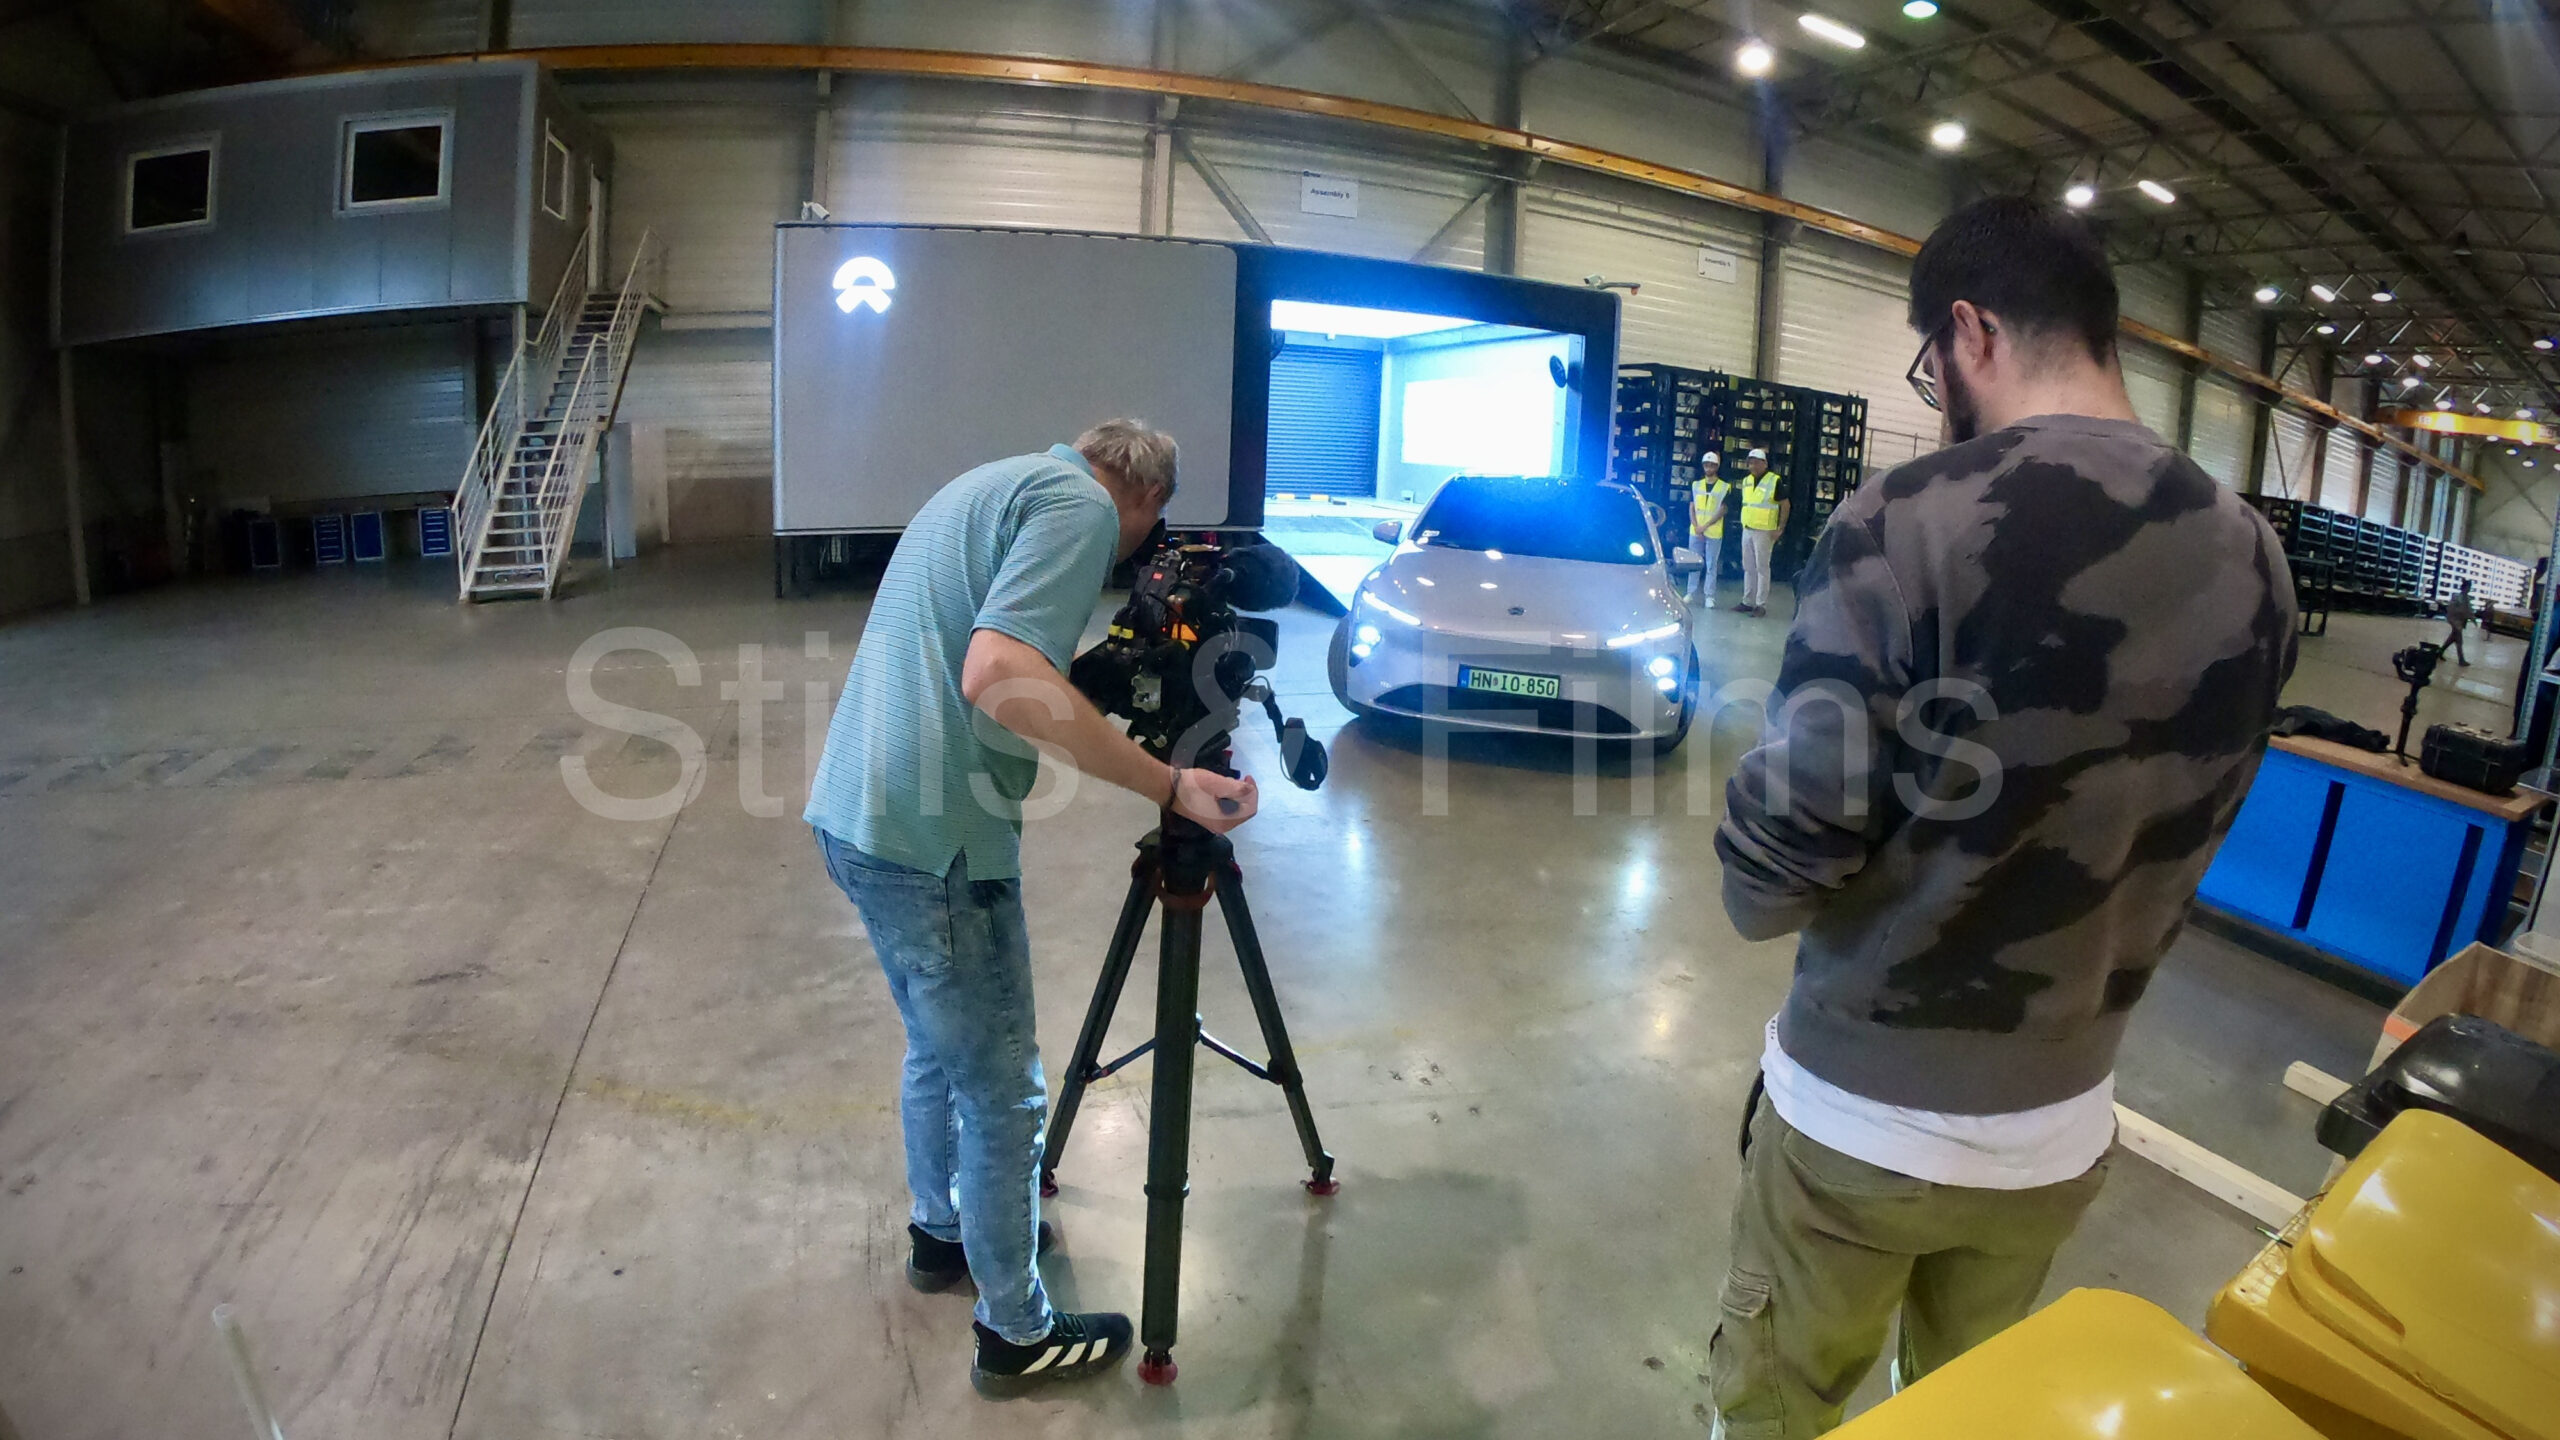 Our video crew worked with NIO, a Chinese electric car manufacturer